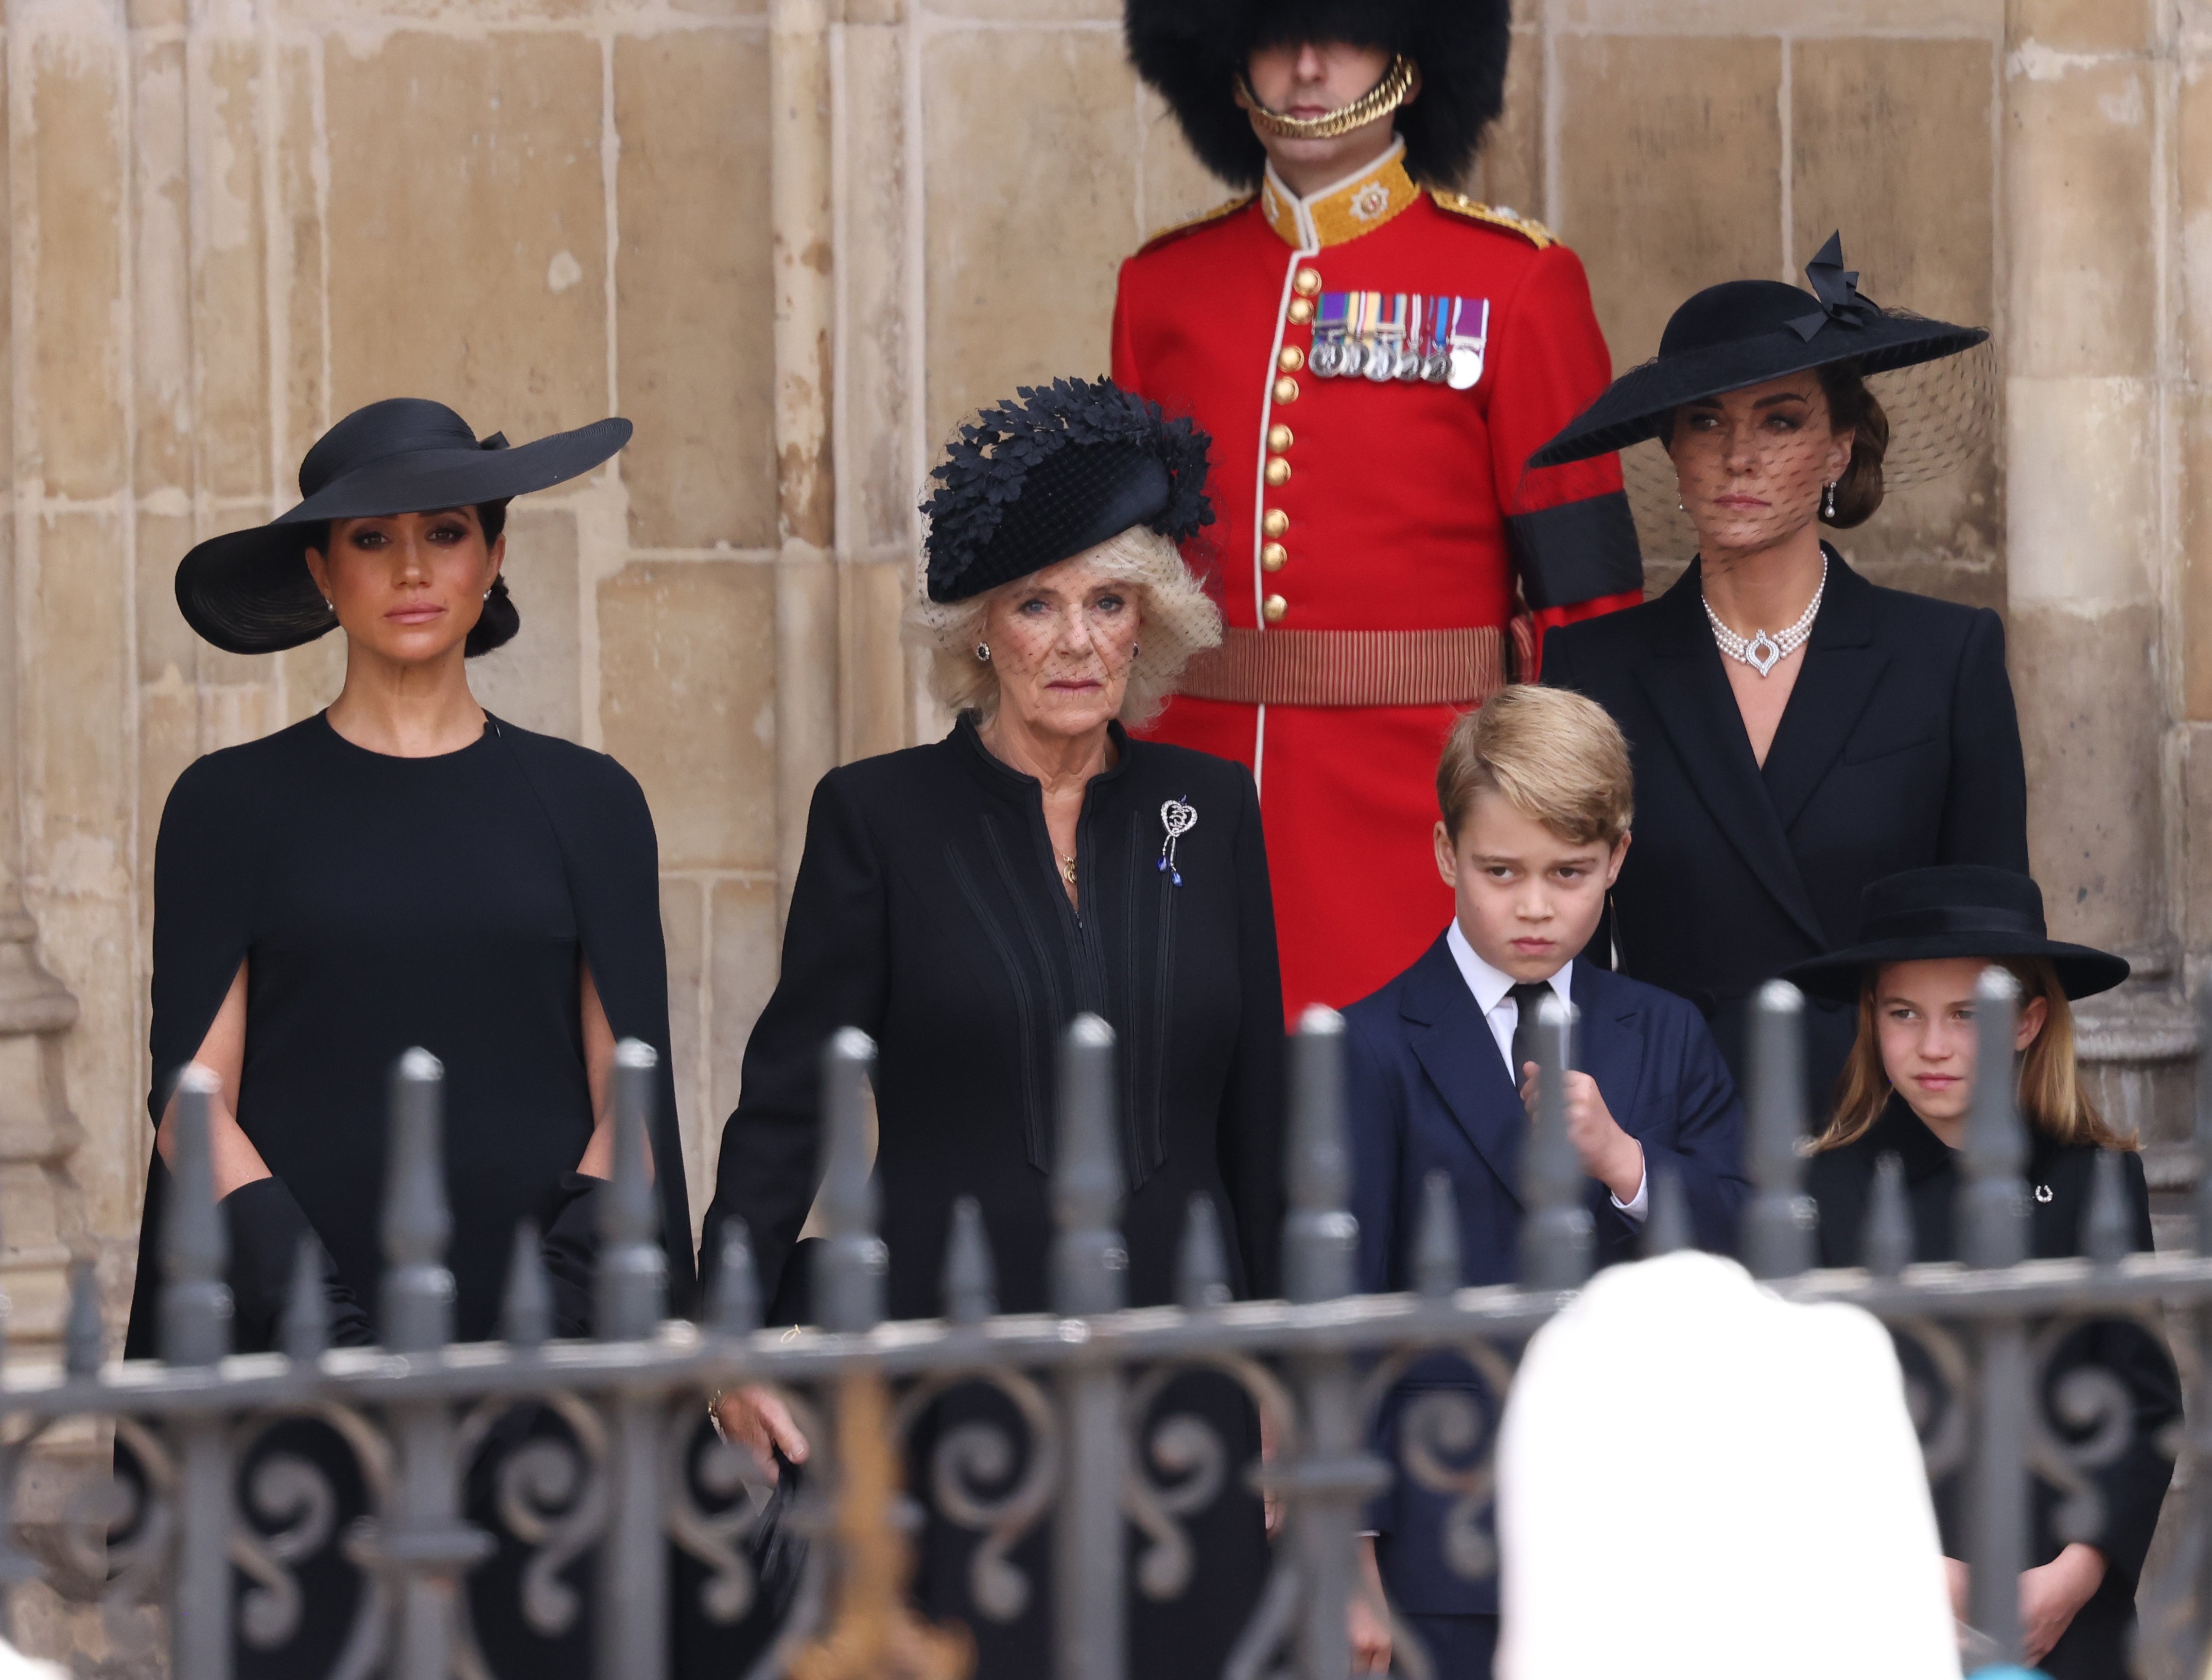 Meghan, Duchess of Sussex, Camilla, Queen Consort, Prince George of Wales, Catherine, Princess of Wales, and Princess Charlotte of Wales during the State Funeral of Queen Elizabeth II at Westminster Abbey on September 19, 2022, in London, England. | Source: Getty Images